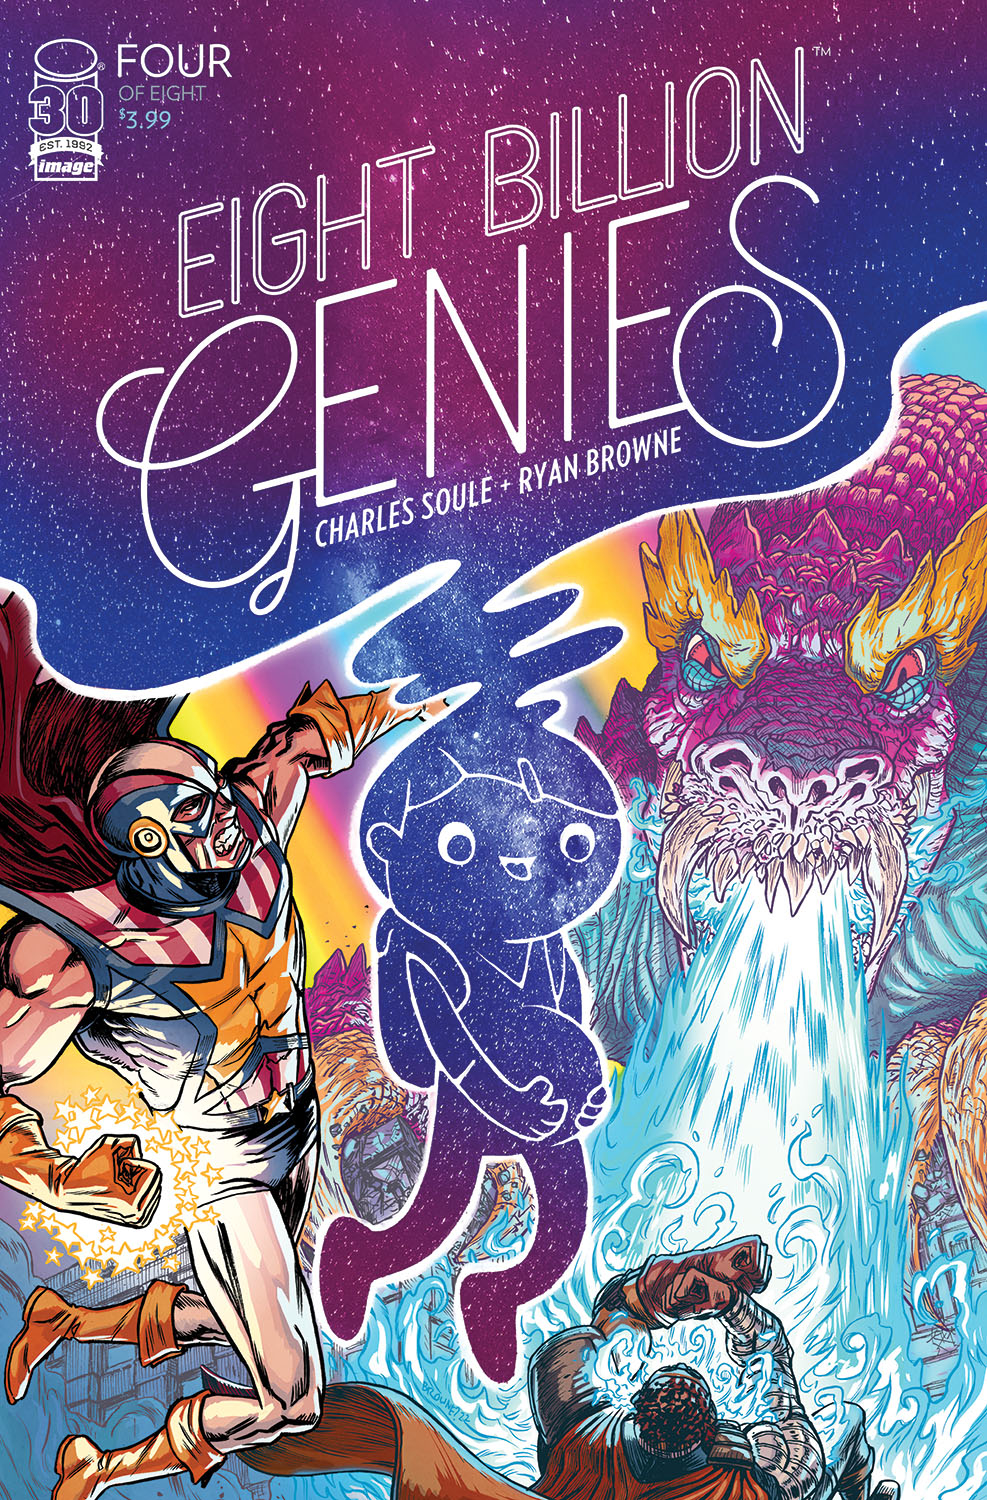 Eight Billion Genies #4 Cover A Browne (Mature) (Of 8)